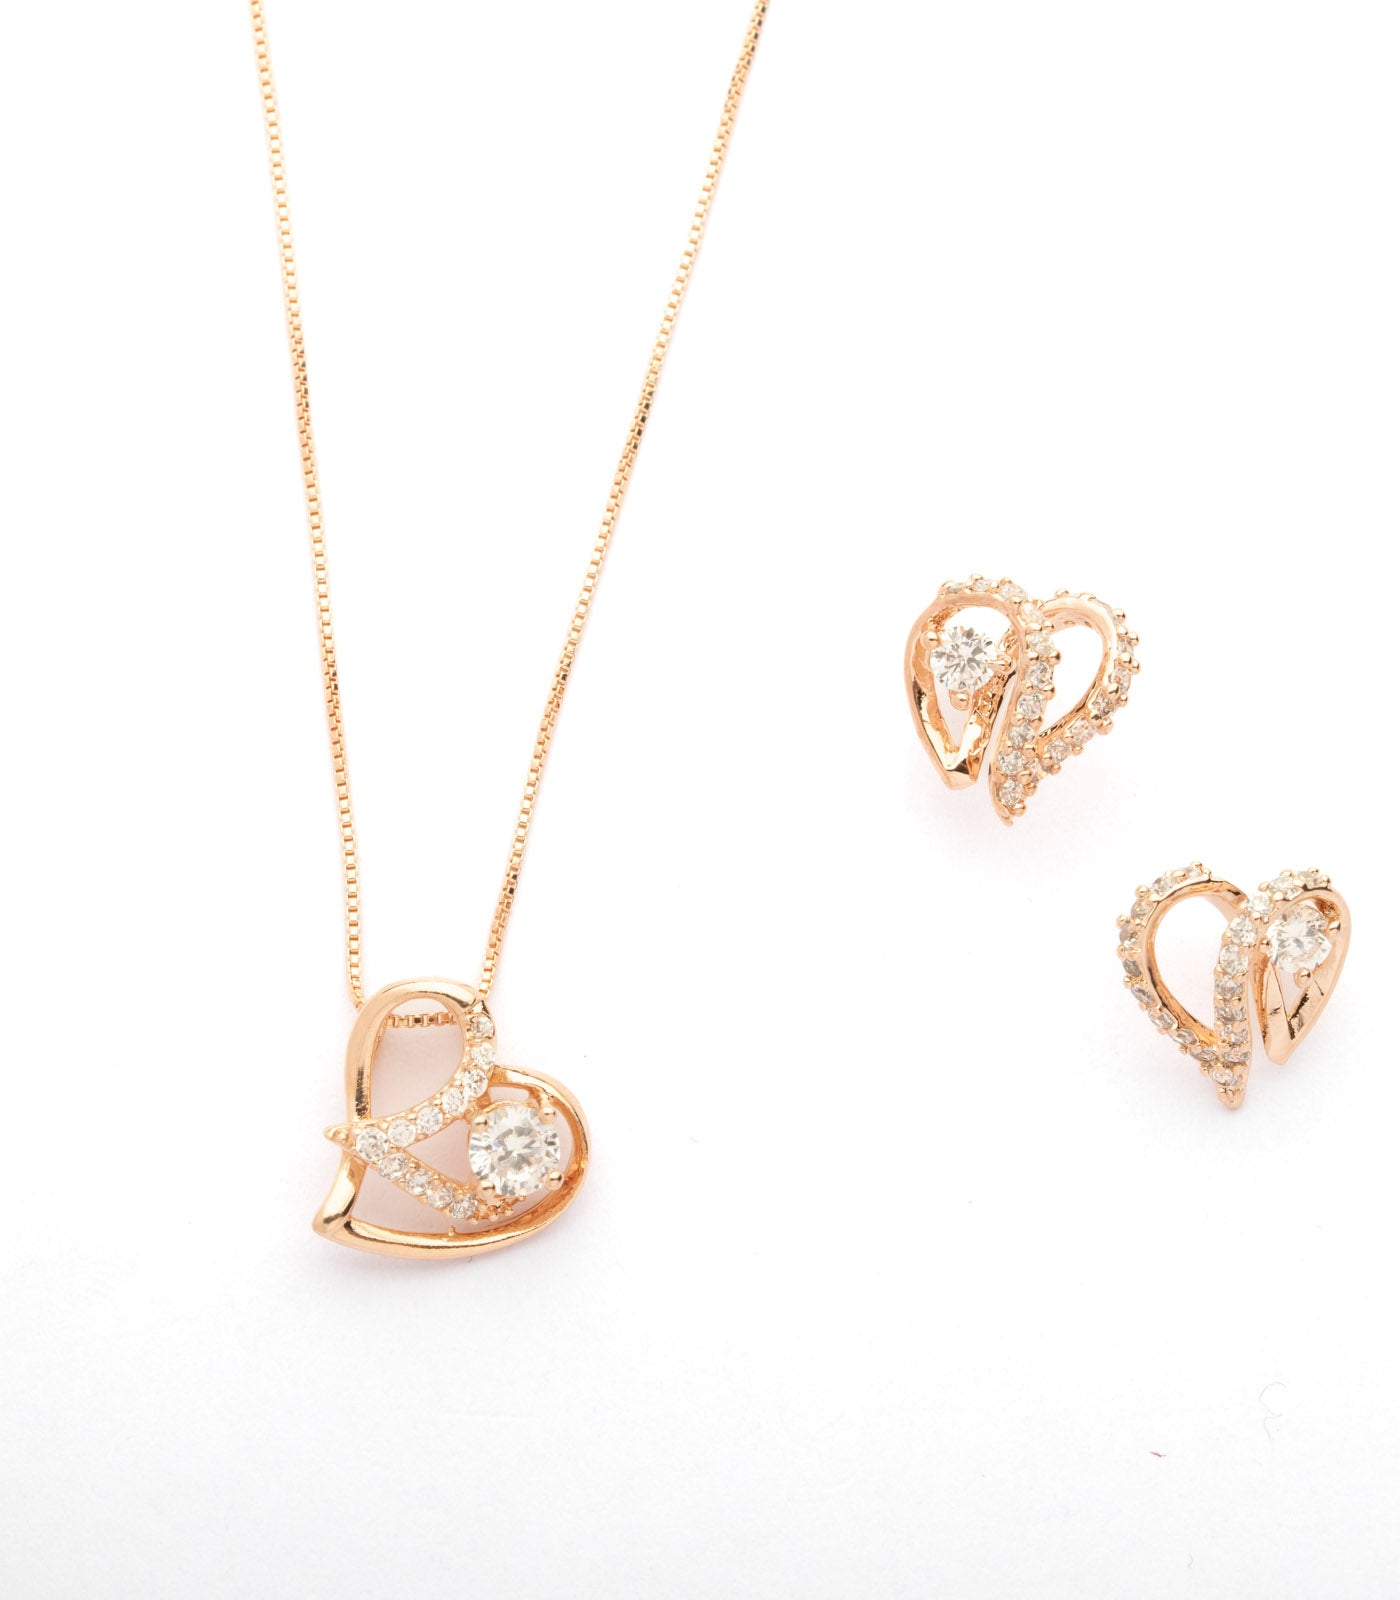 Clever Heart Necklace Set (Brass)